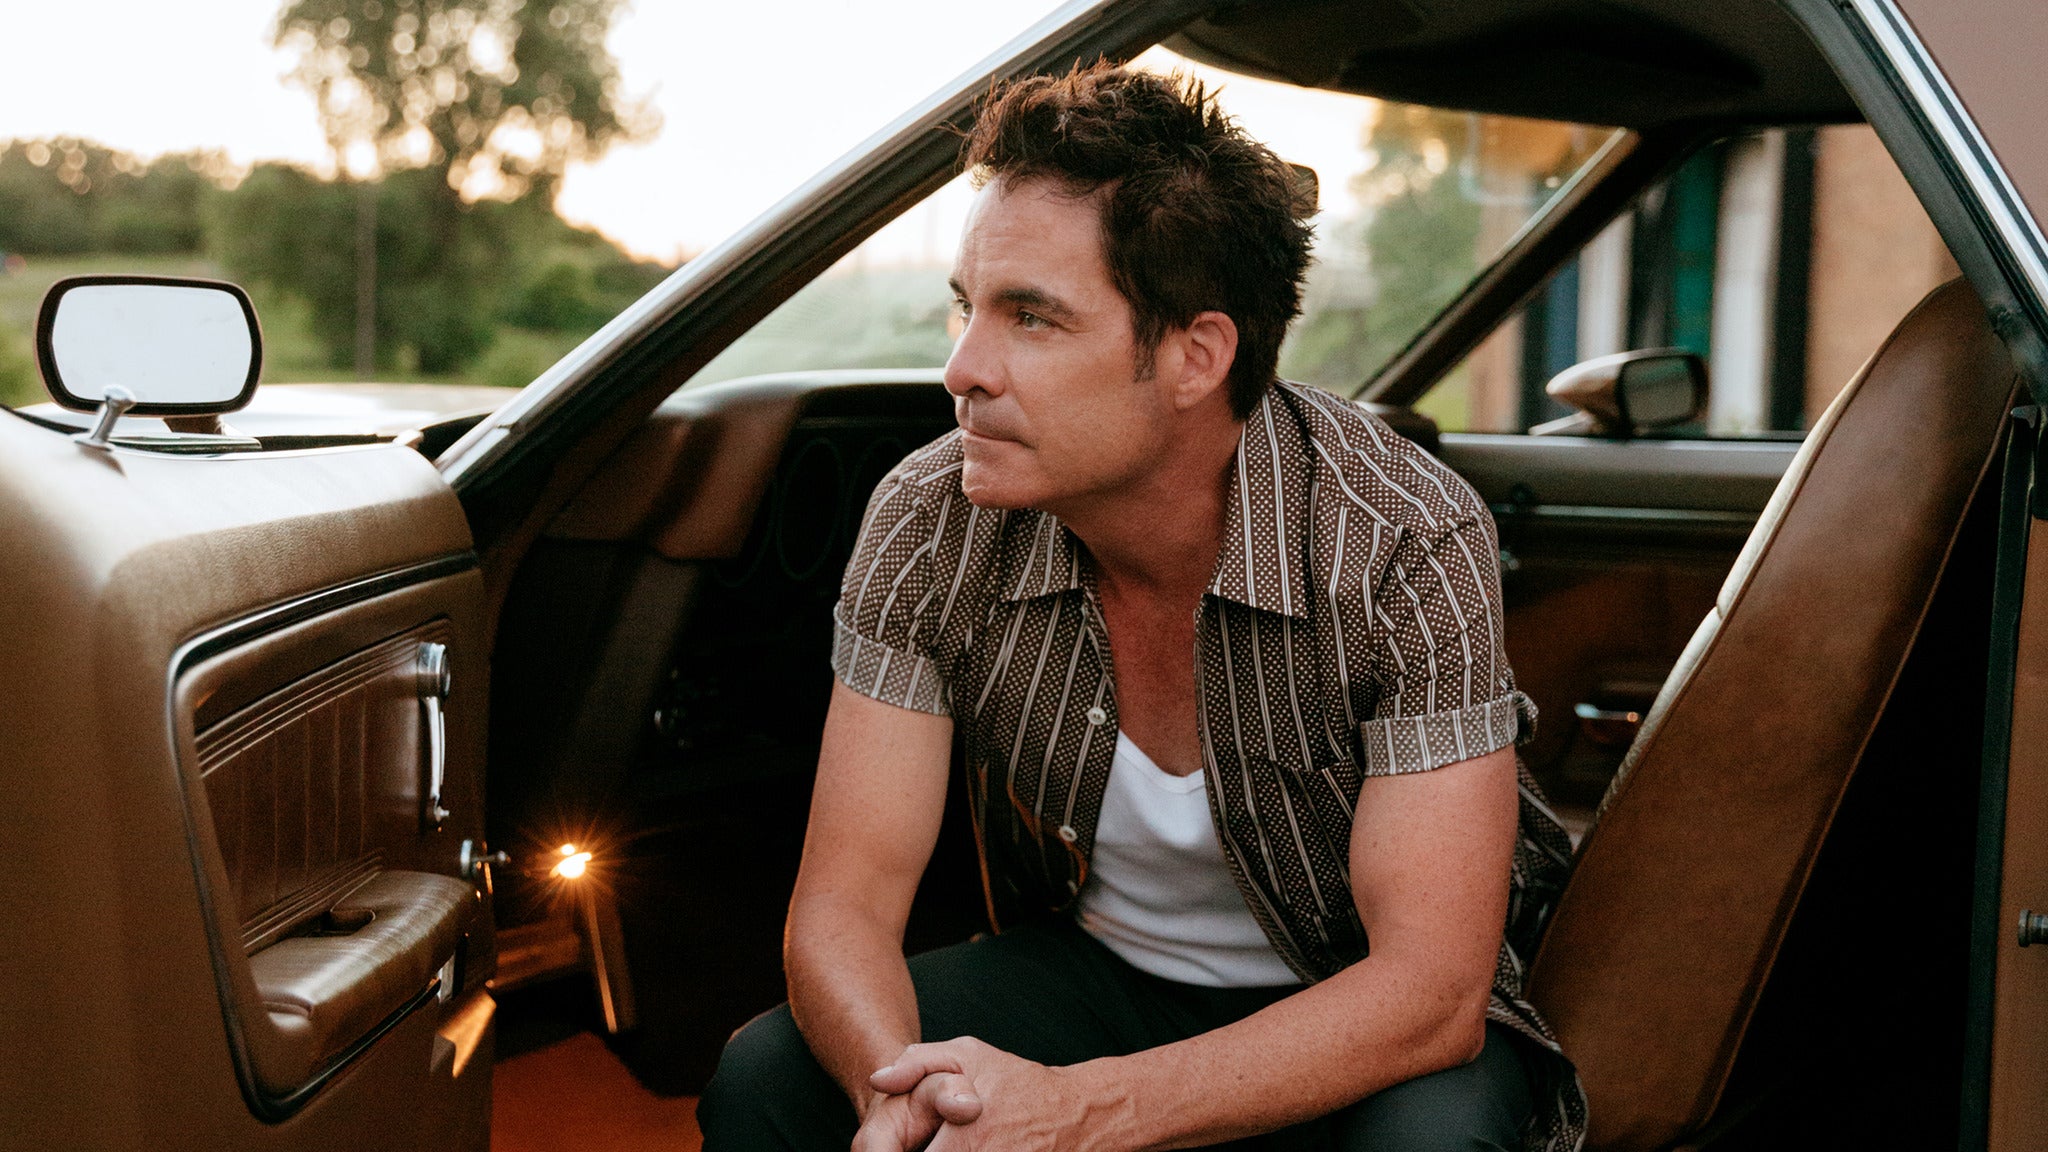 Train in Stateline promo photo for Official Platinum presale offer code